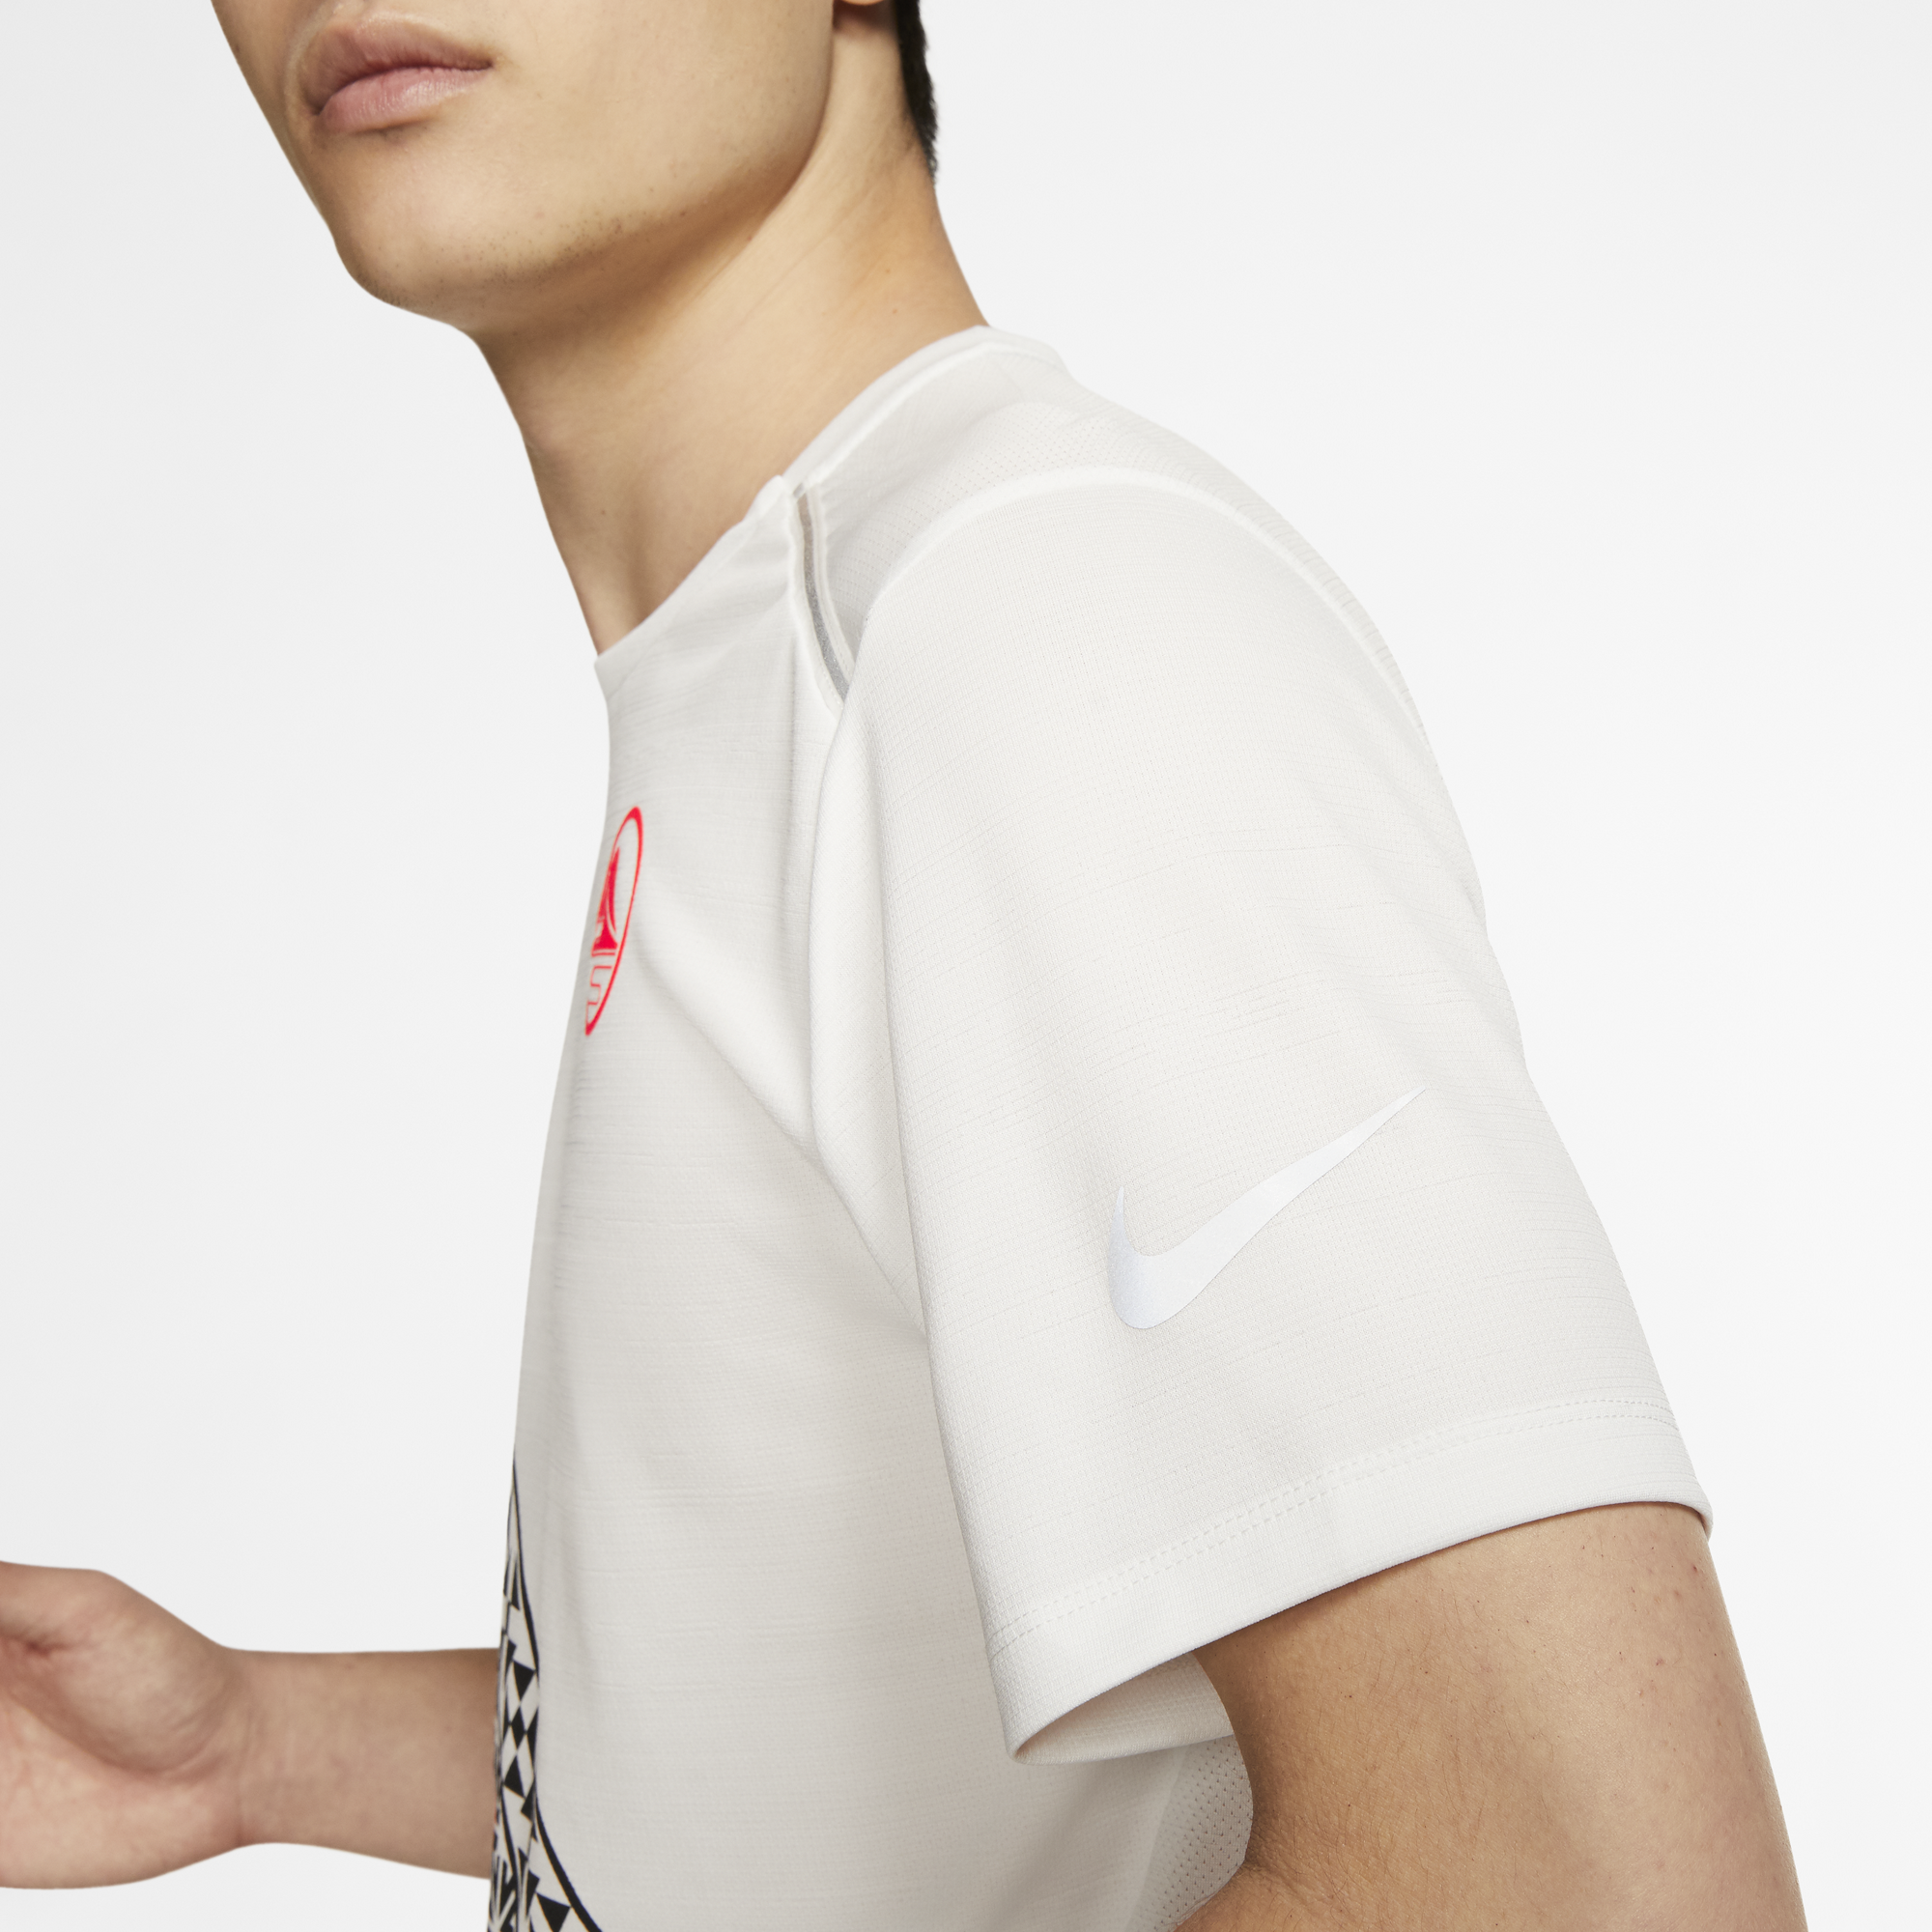 New Arrival: Nike's Hakone Ekiden Collection Honors Historic Race